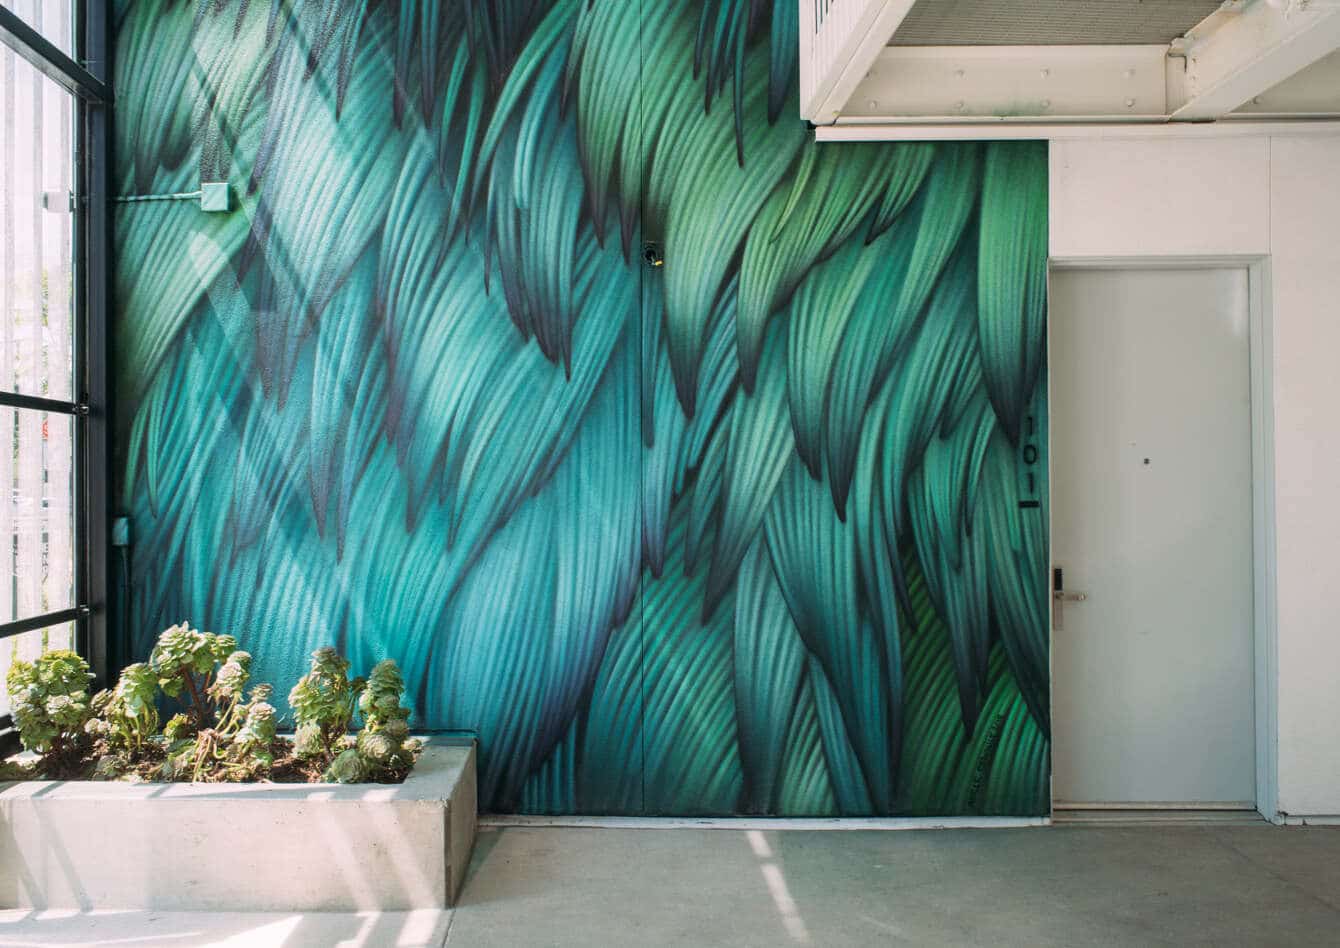 Pigeon Feather Mural by Adele Renault